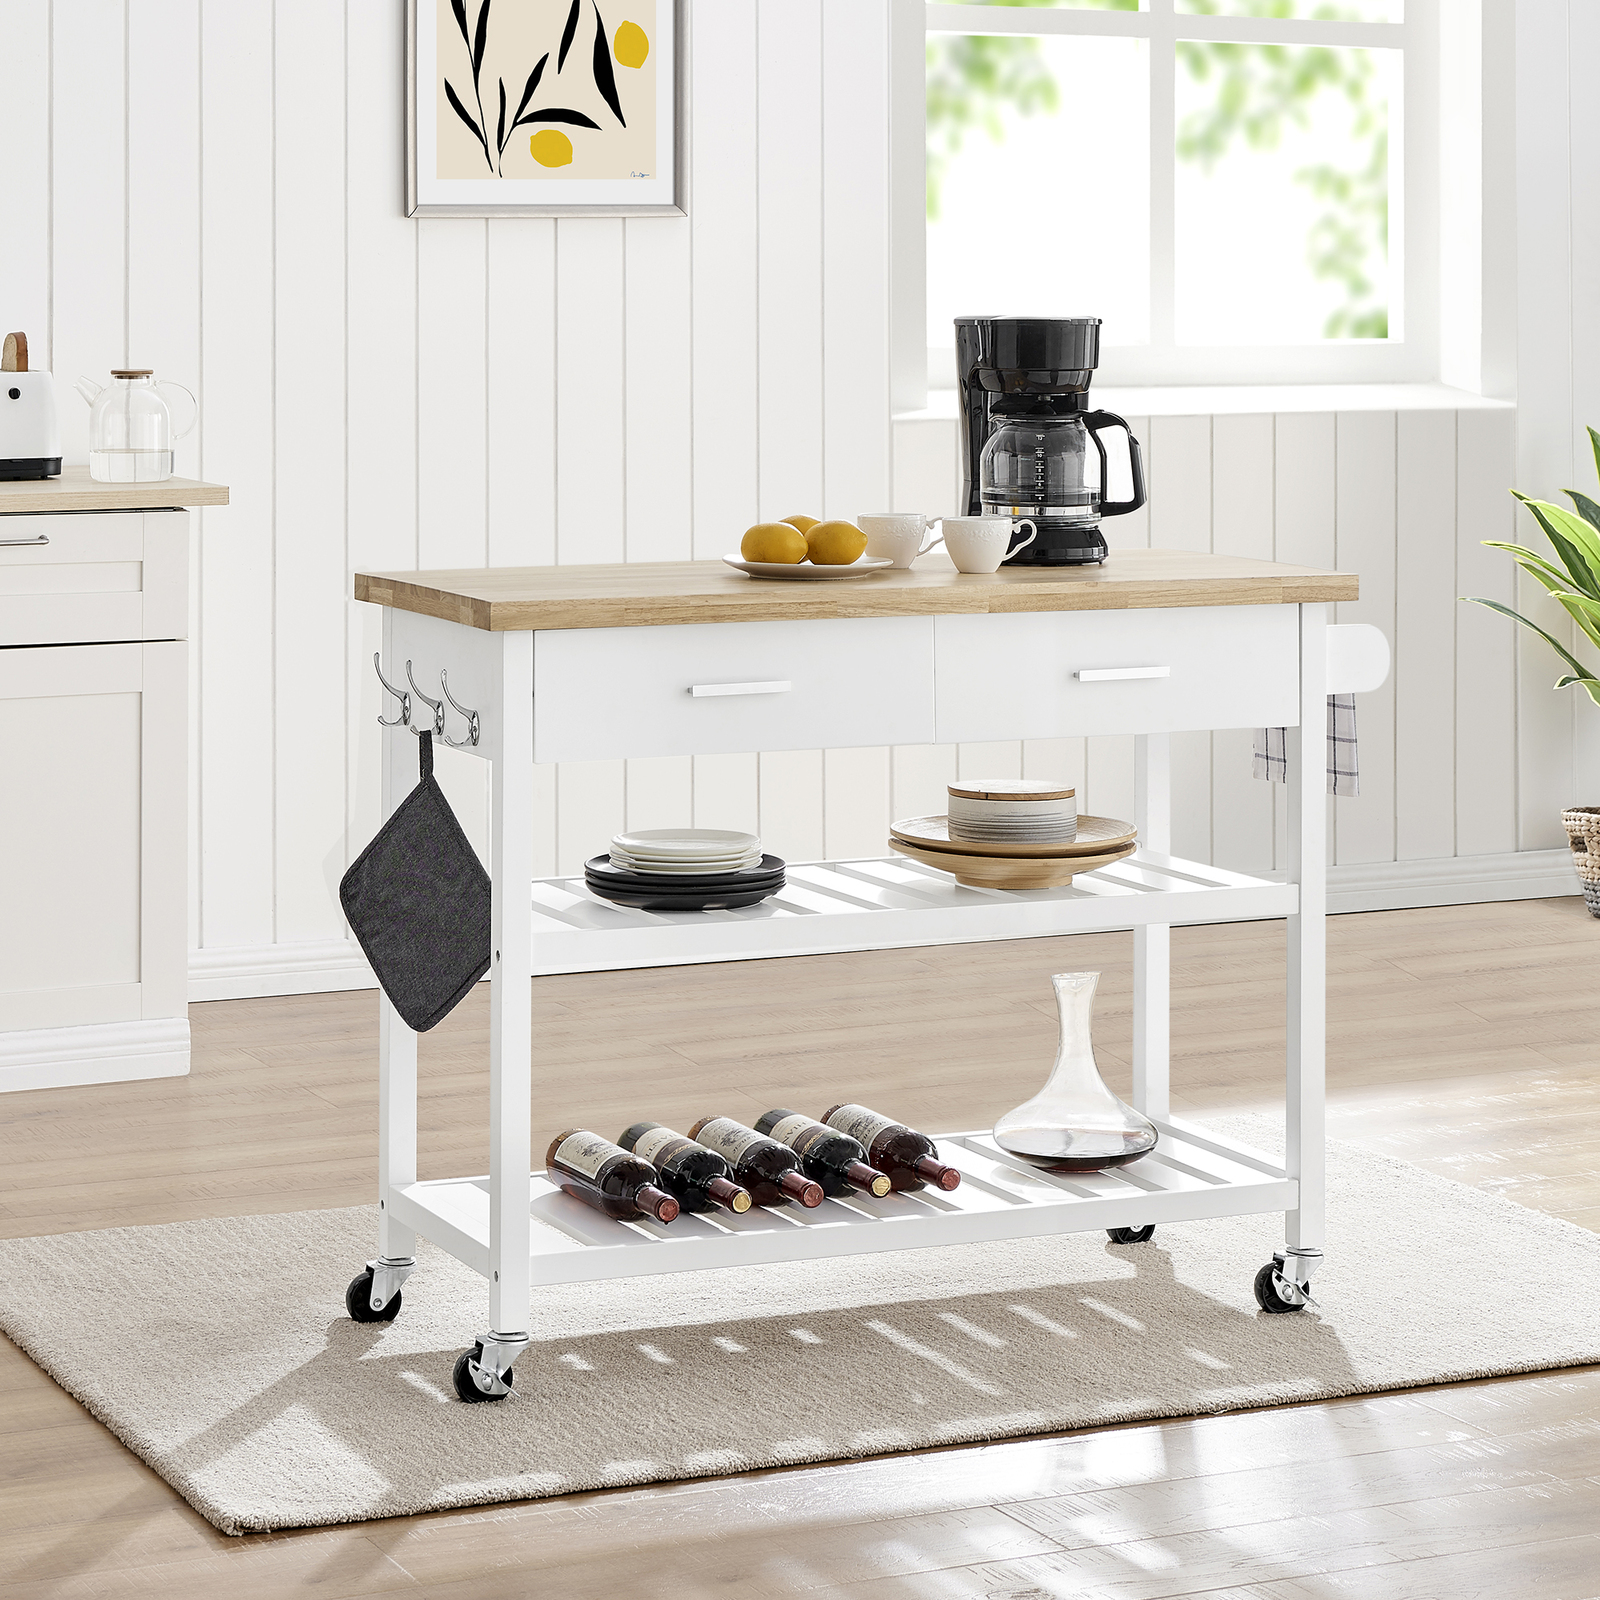 Buy Kitchen Island Trolley - 2 Drawers 2 Tier - White and Natural -  117x89cm | Beyond Bright